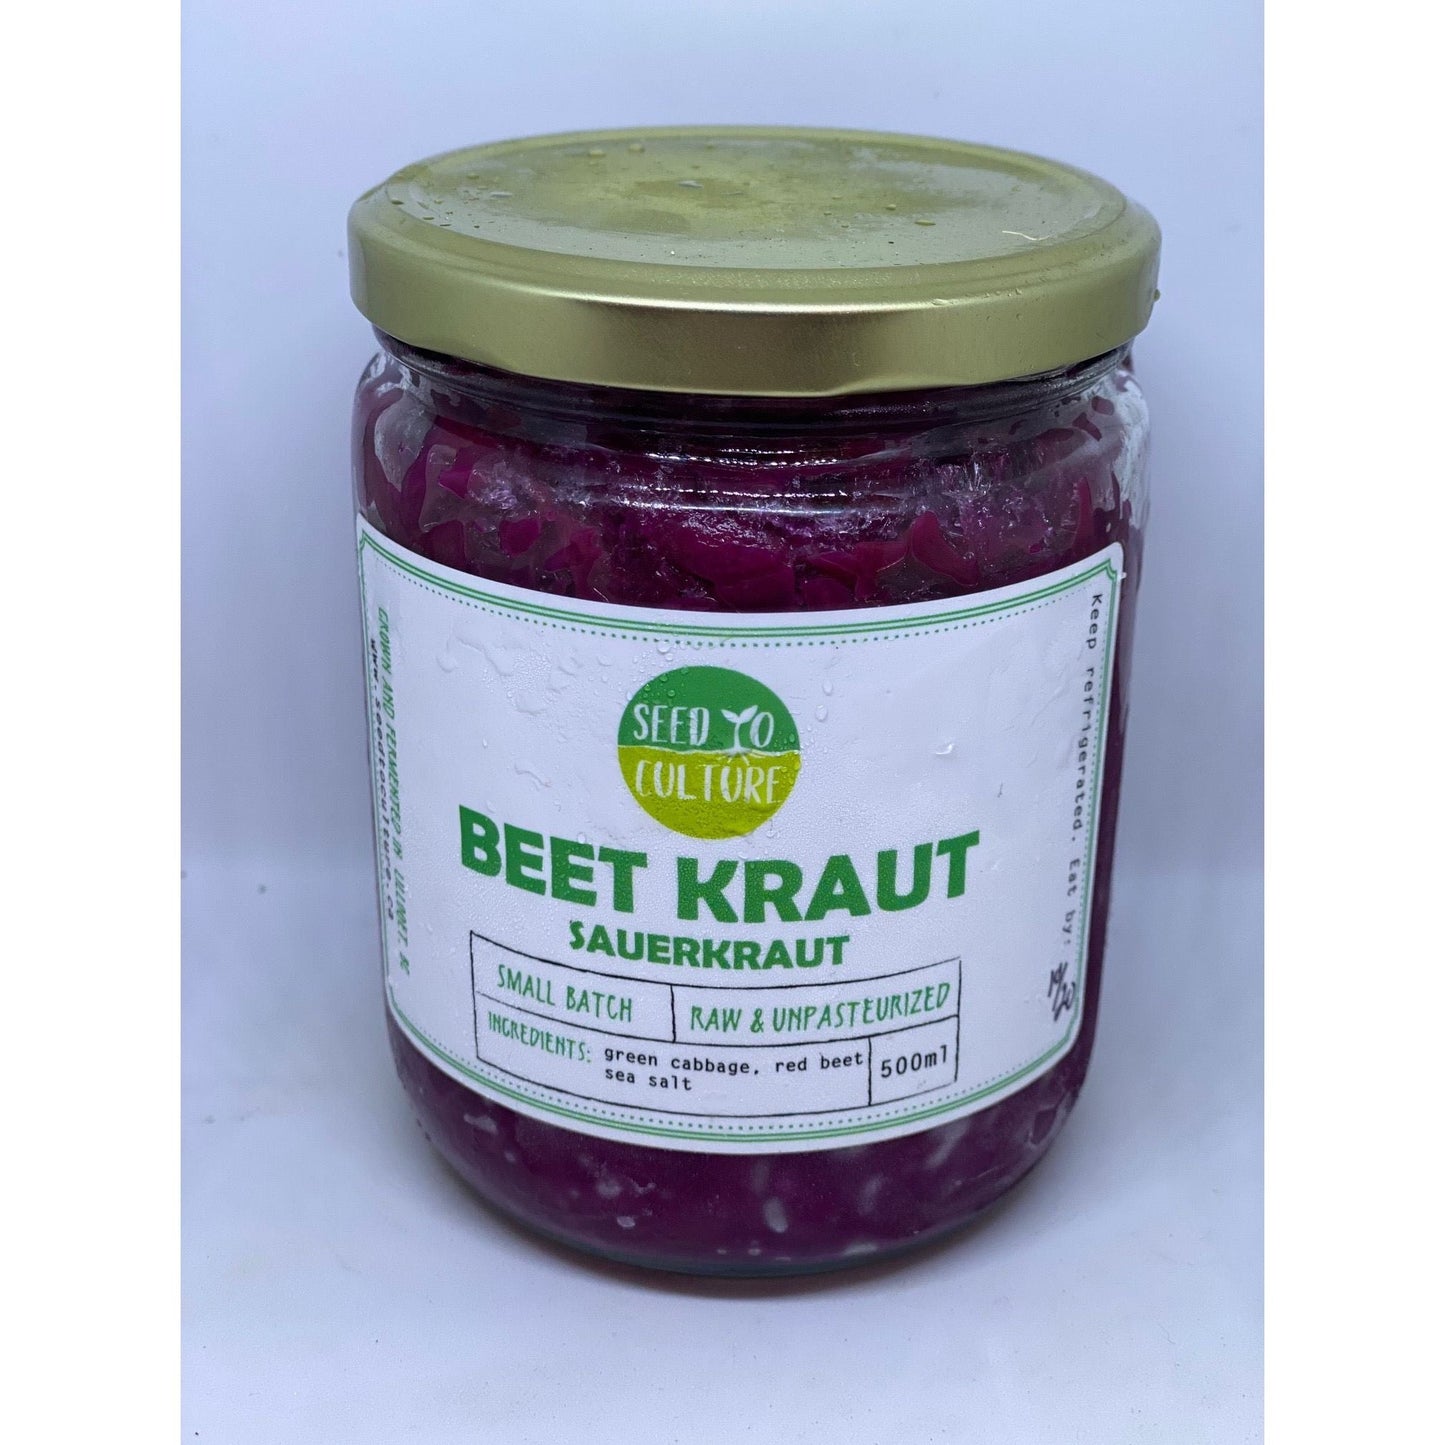 Trio of Sauerkraut - Seed to Culture ( while supplies last!!! )